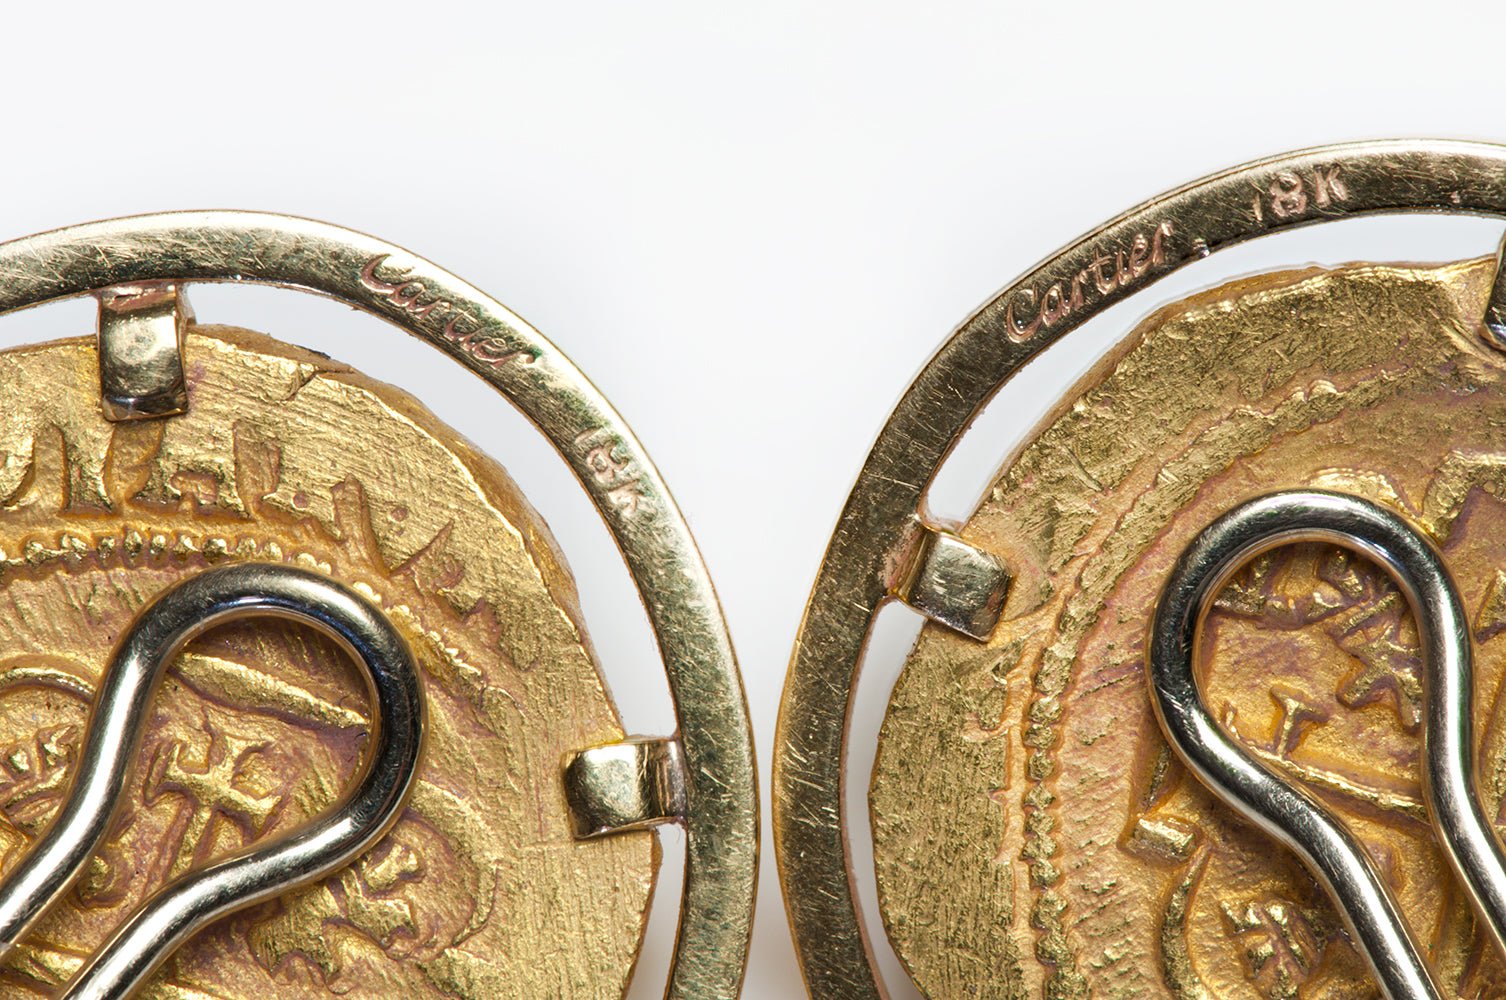 Cartier Gold Ancient Coin Earrings - DSF Antique Jewelry